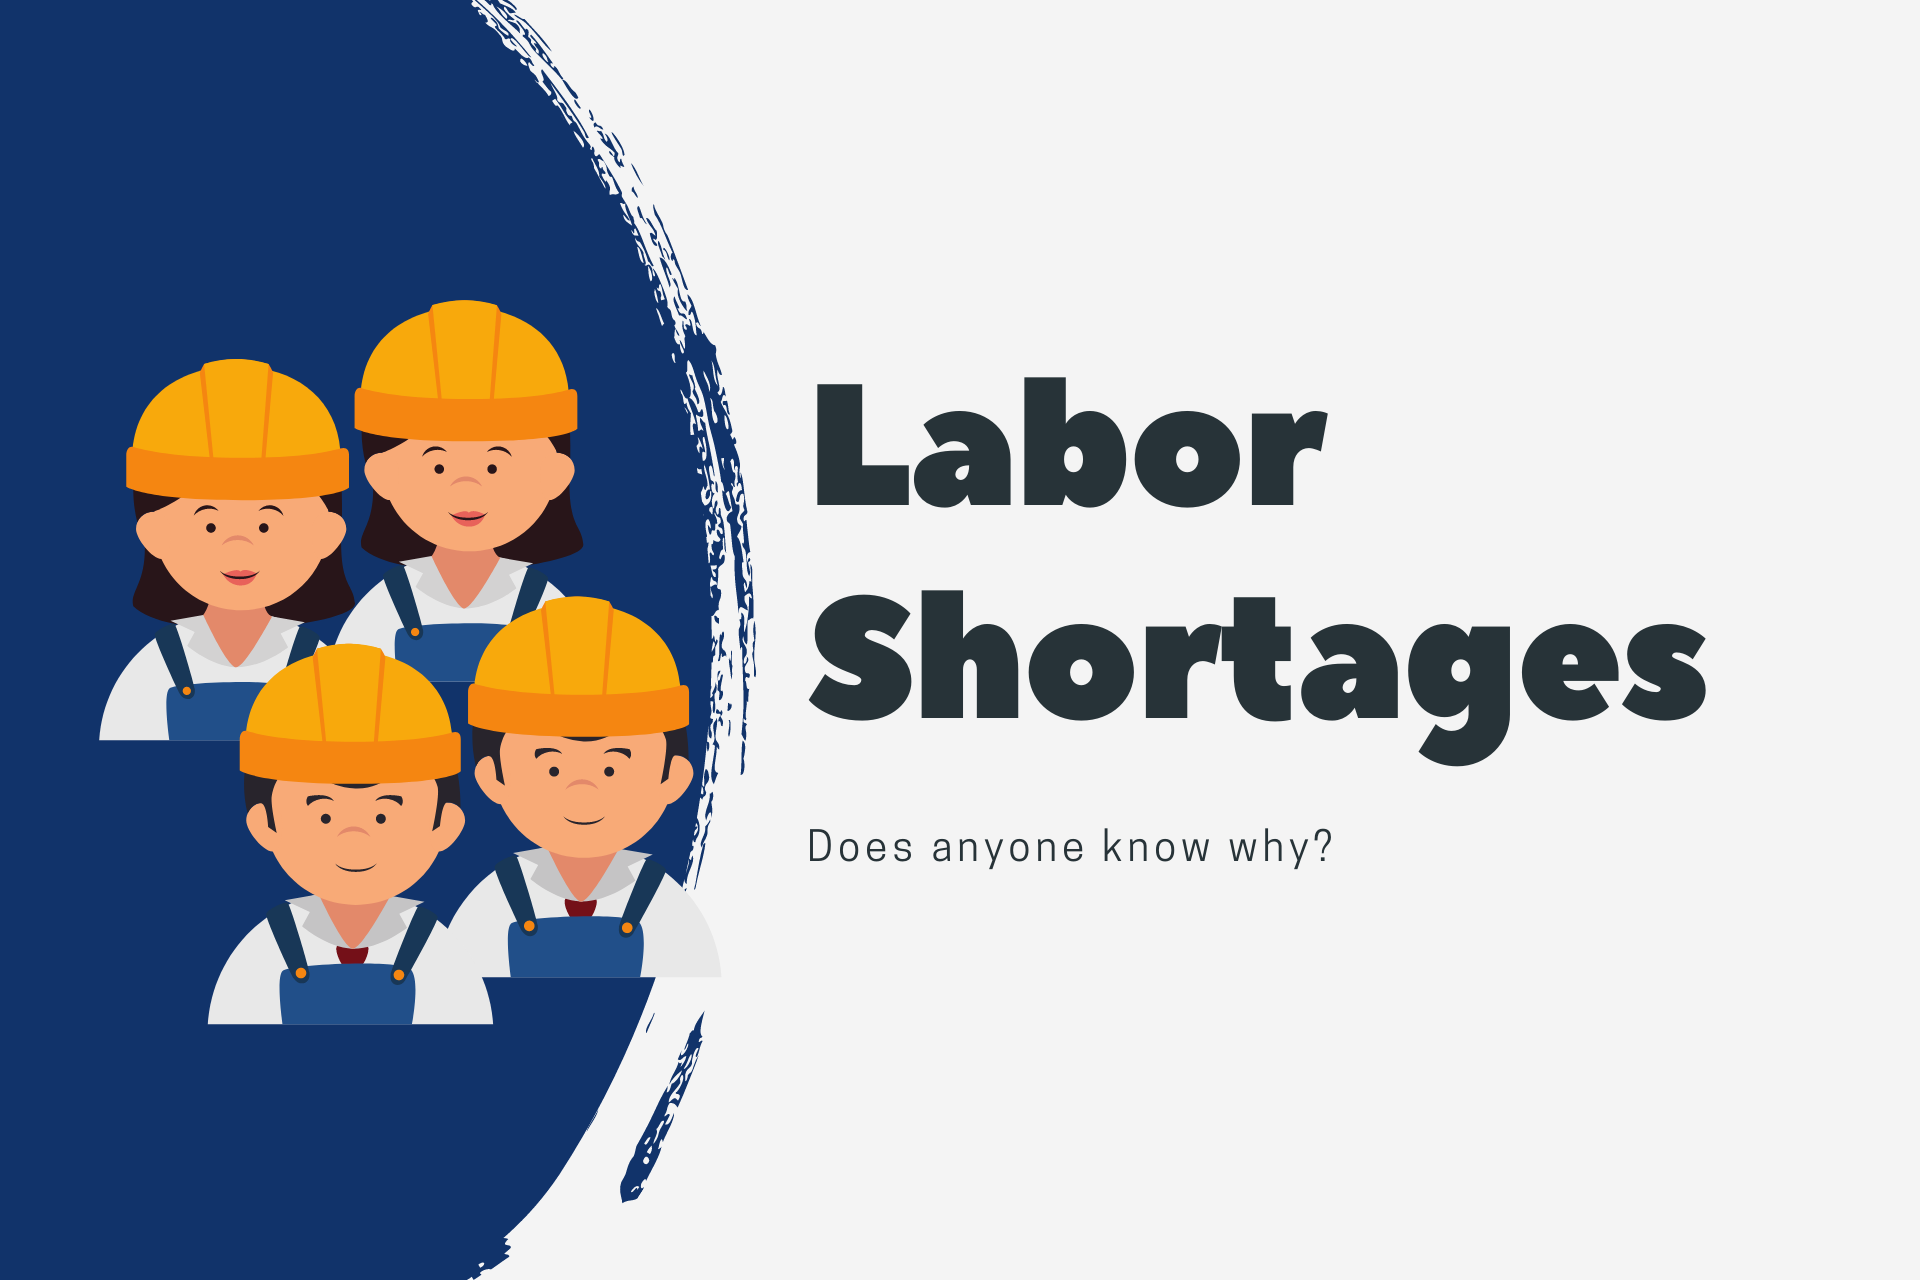 Labor Shortages - Does Anyone Know Why